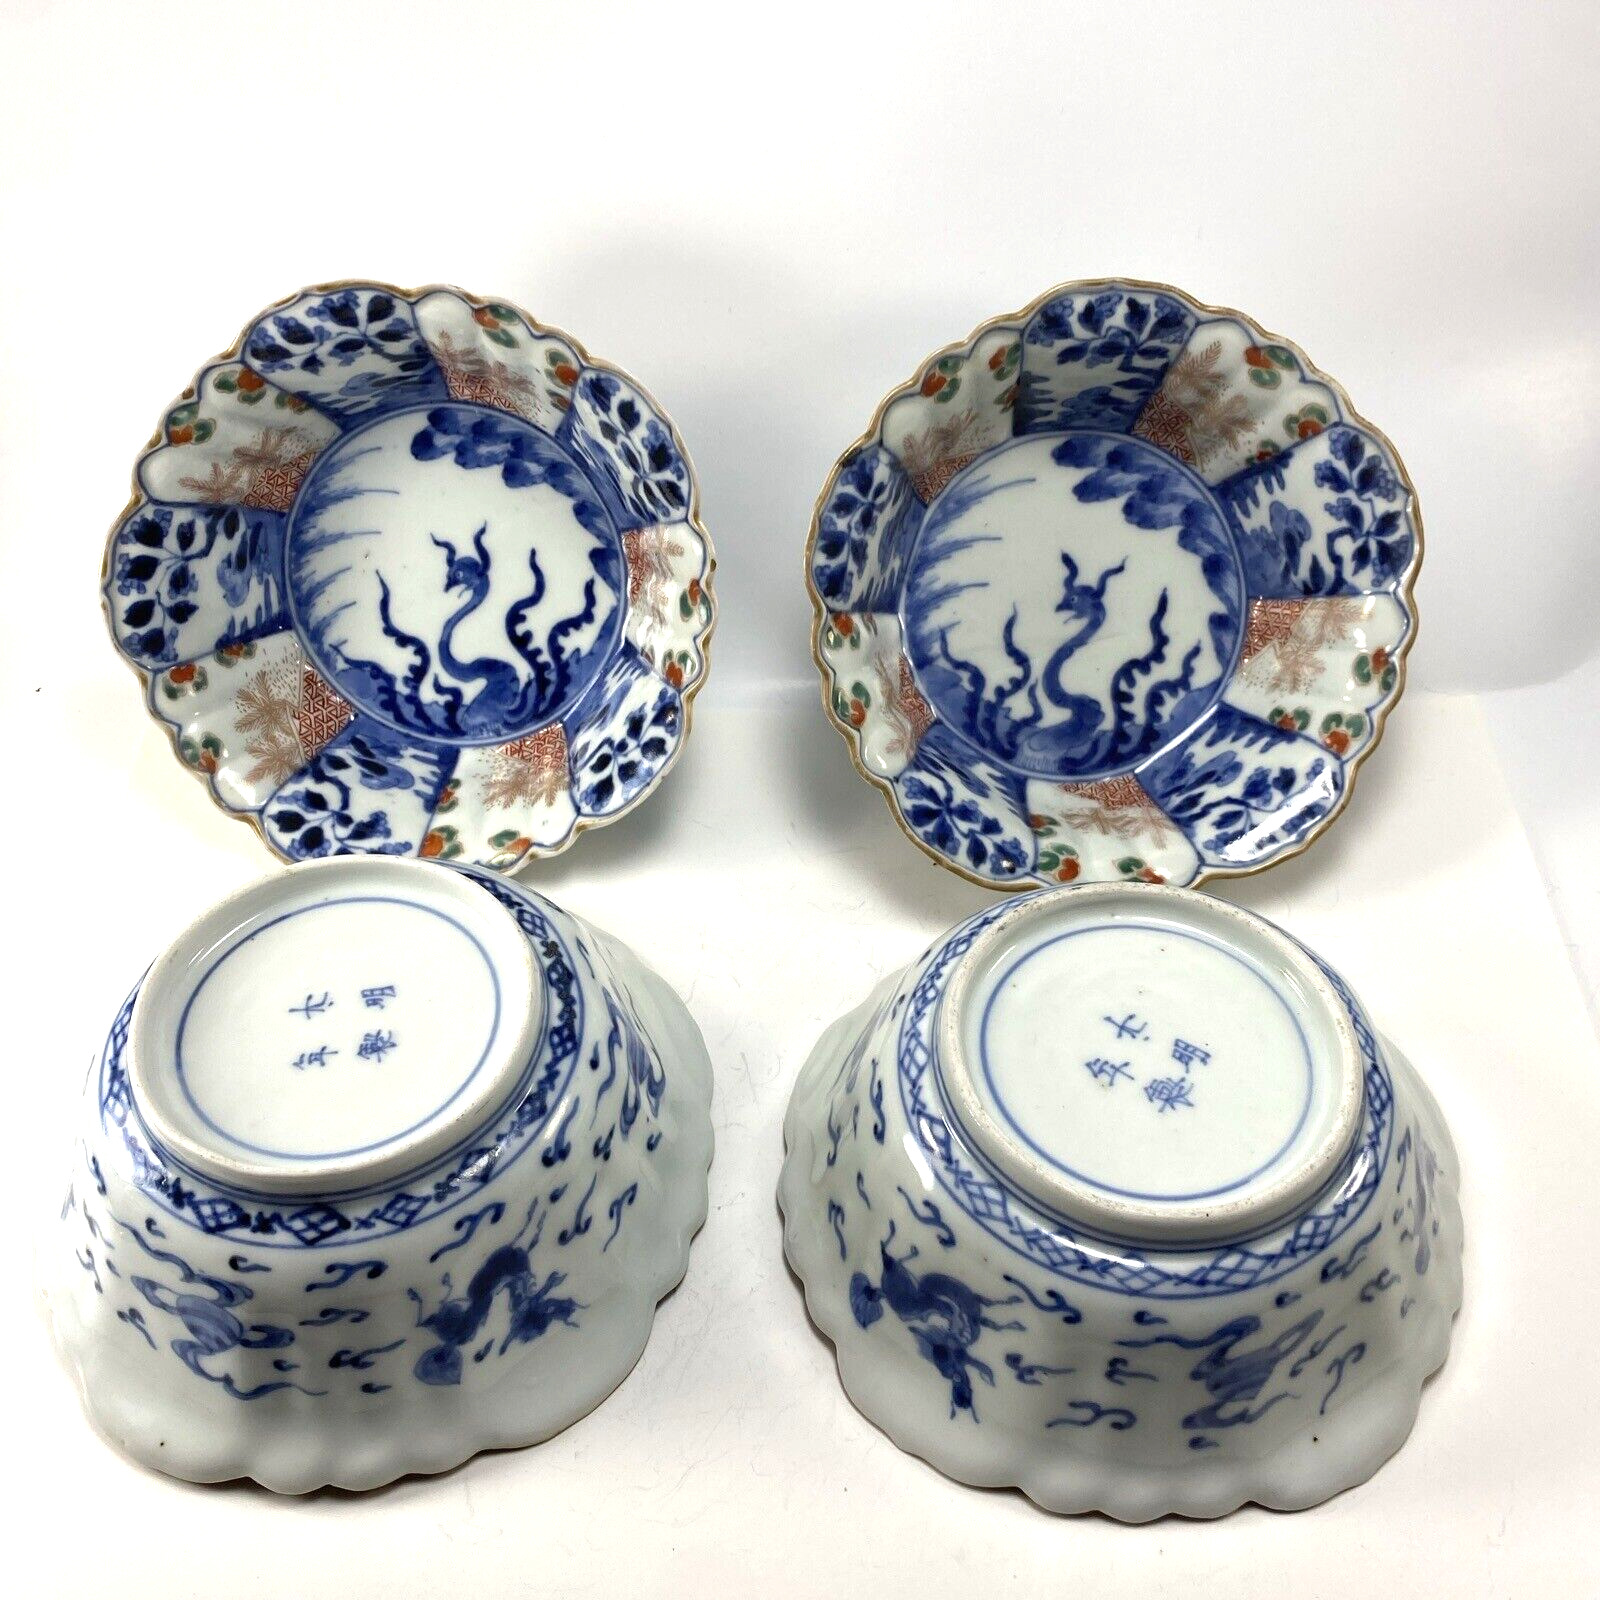 Four Antique or Vintage Japanese Chinese Imari Bowls 19th / 20th C👹SEE VIDEO👹